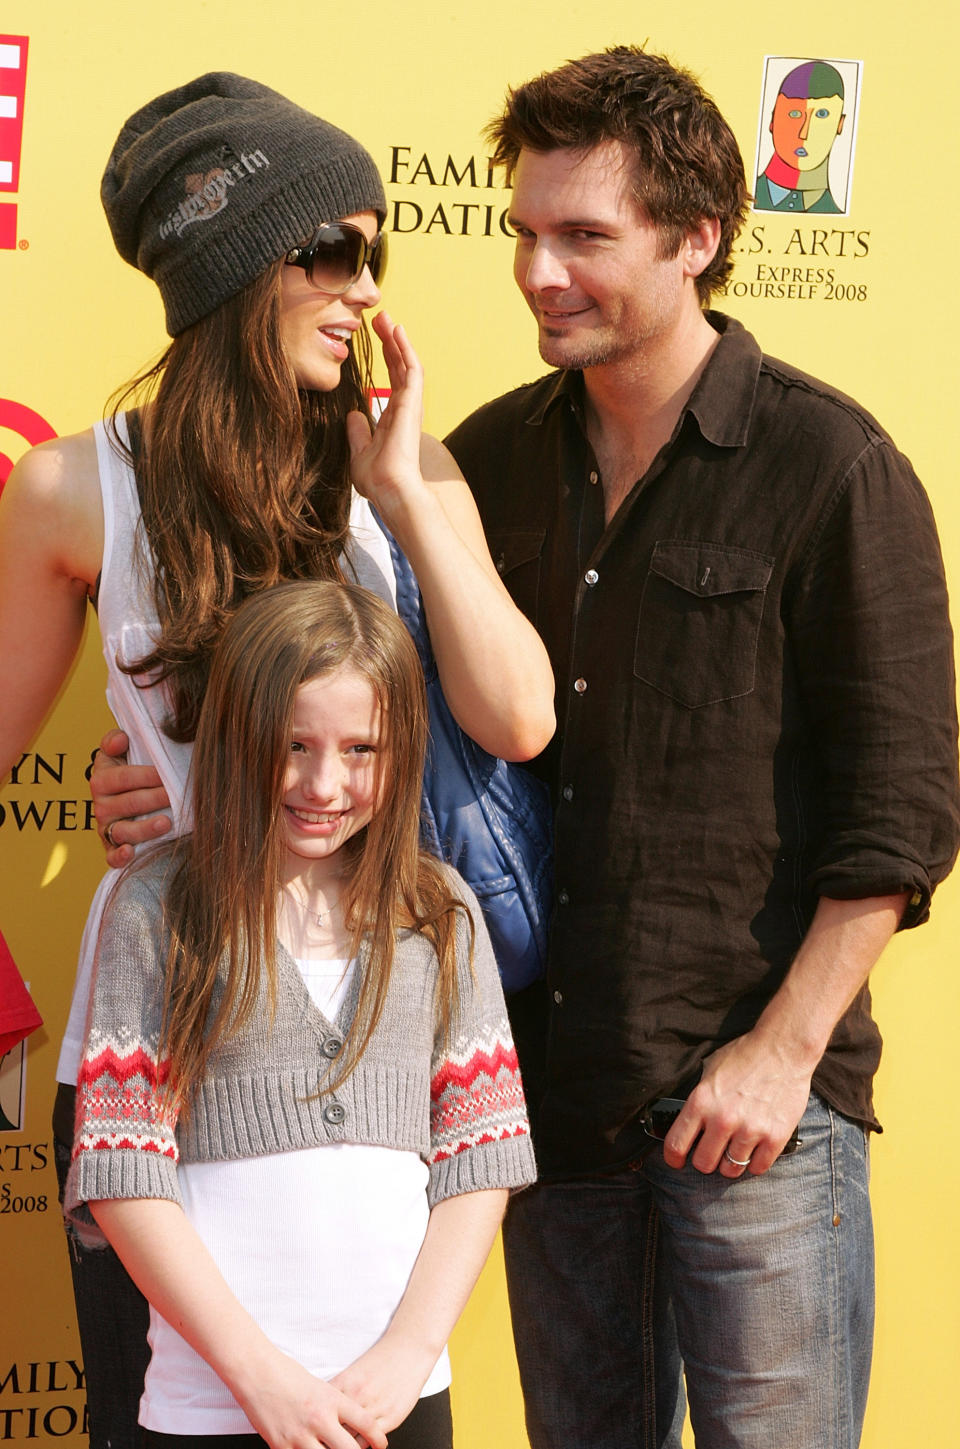 Her famous parents: Kate Beckinsale and Michael Sheen (not pictured above, that's Kate's ex Len Wiseman)